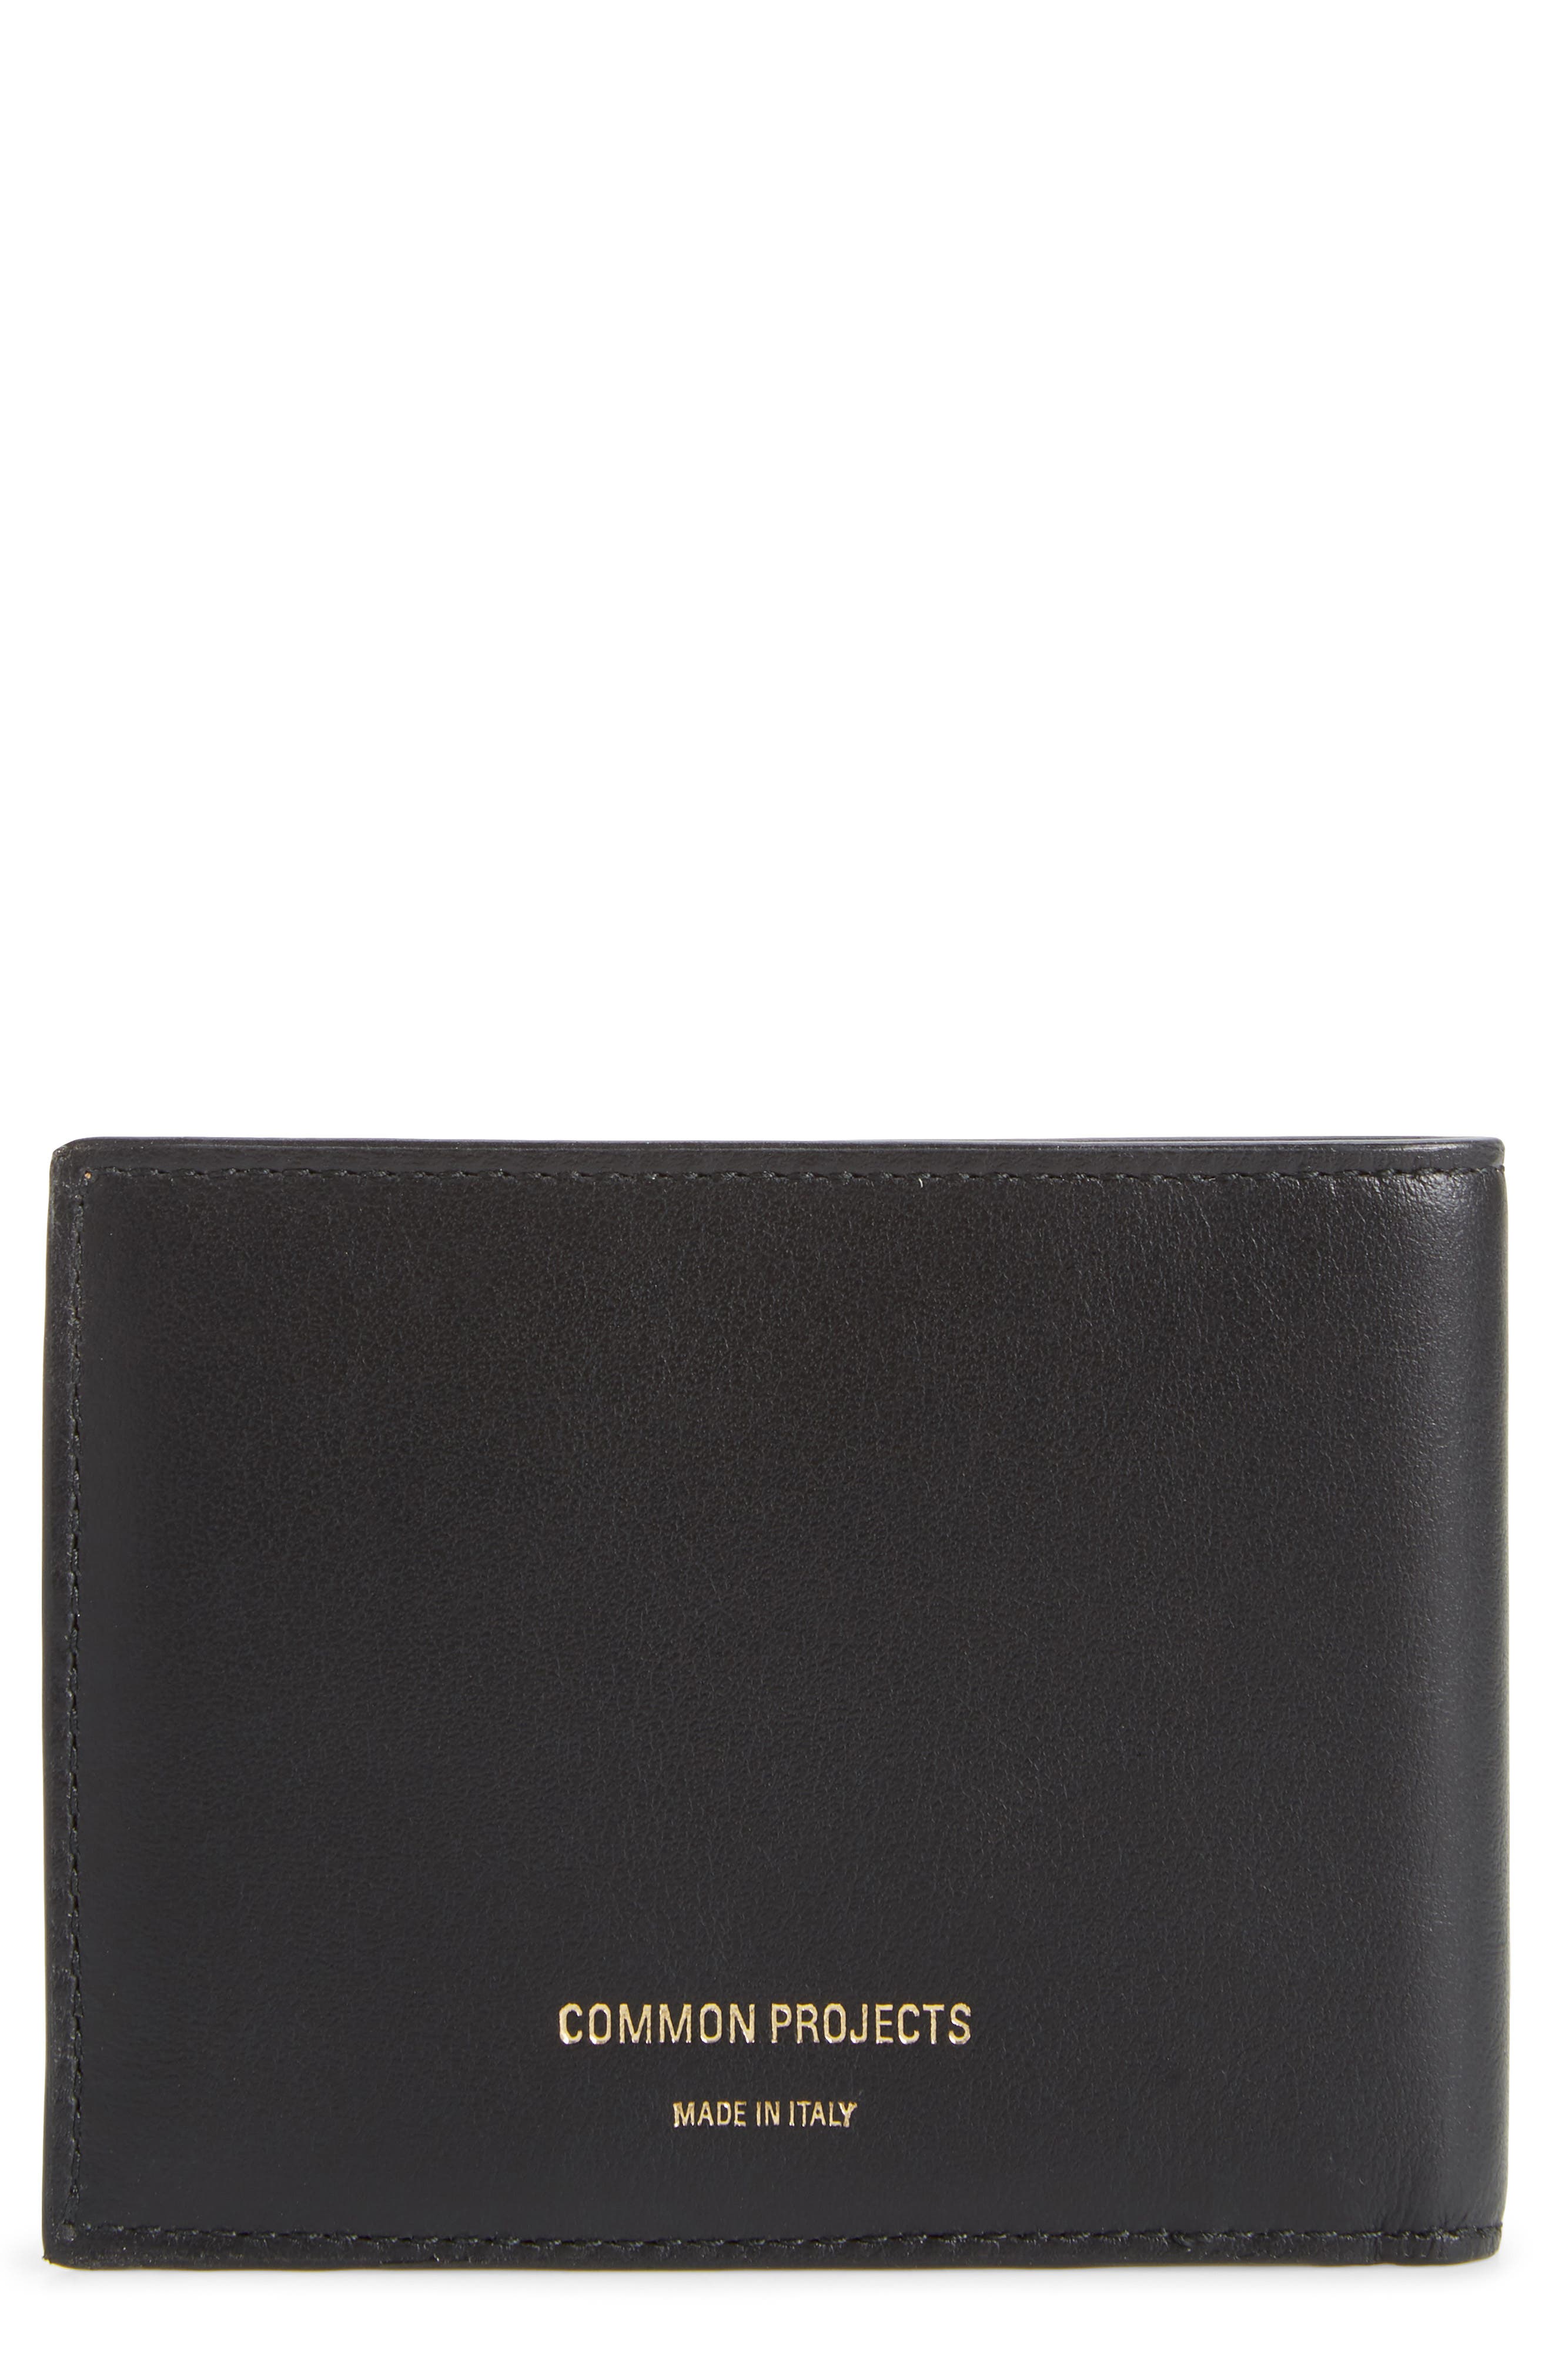 Common Projects Leather Wallet | Nordstrom